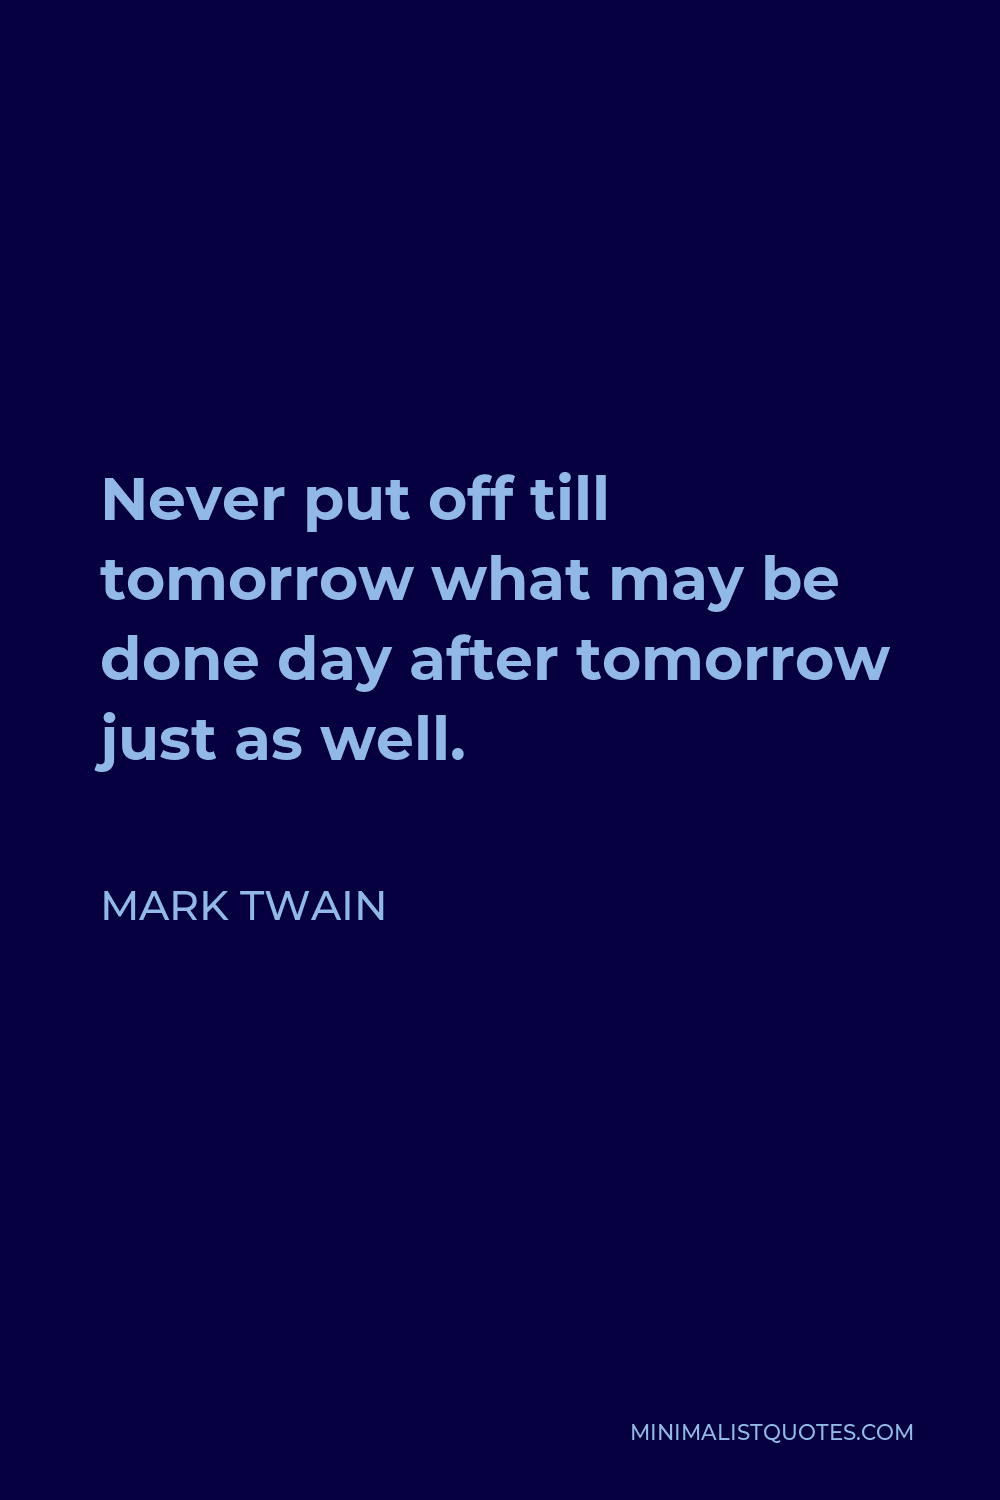 Mark Twain Quote - Never put off till tomorrow what may be done day after tomorrow just as well.